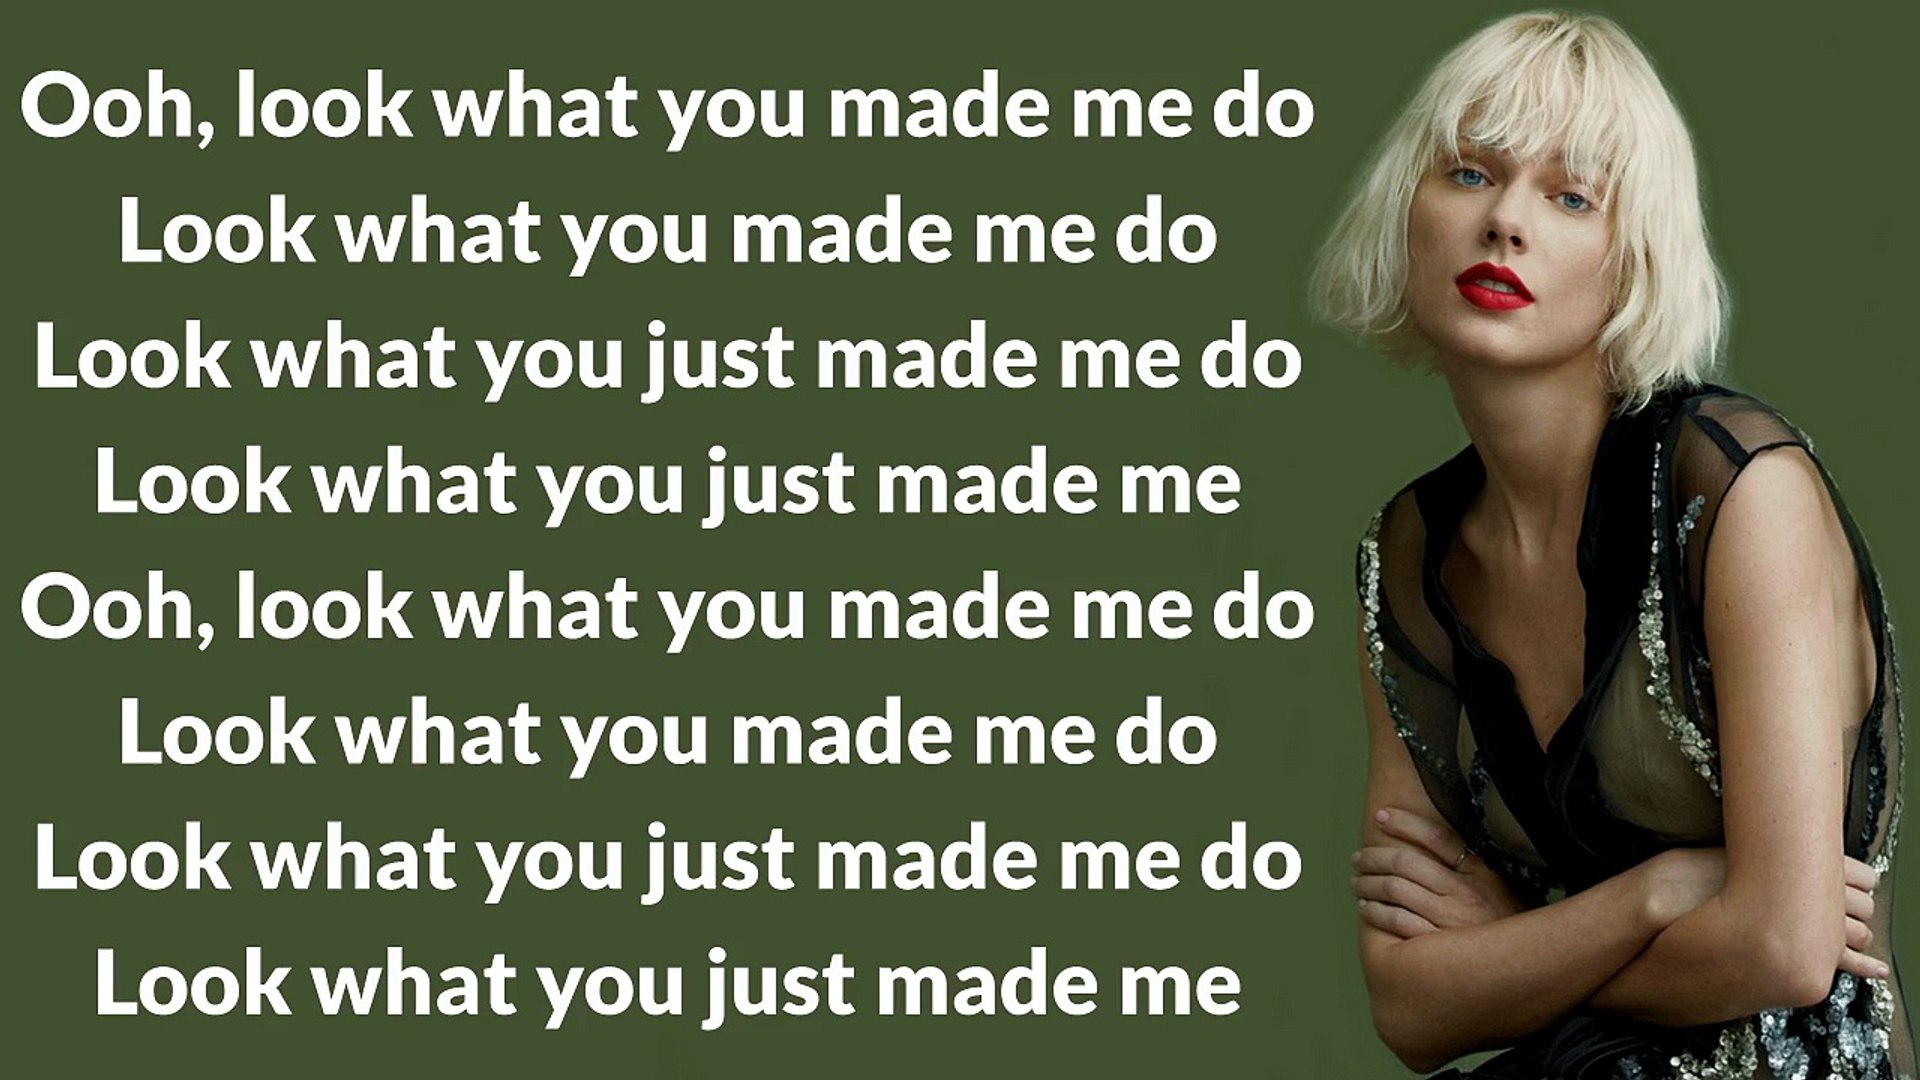 Taylor Swift - Look What You Made Me Do (Lyrics) - video Dailymotion